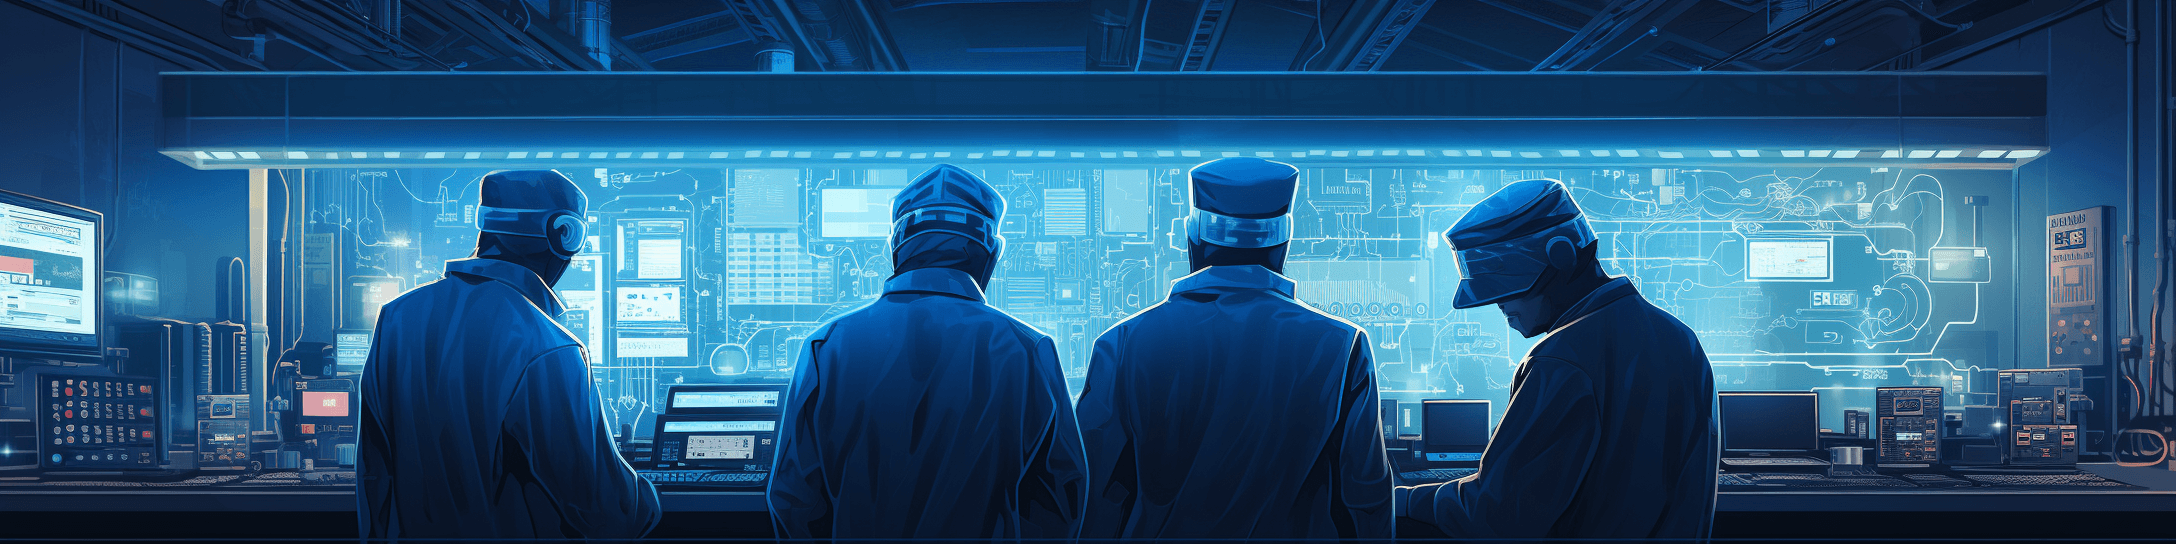 AI illustration of operators on an assembly line